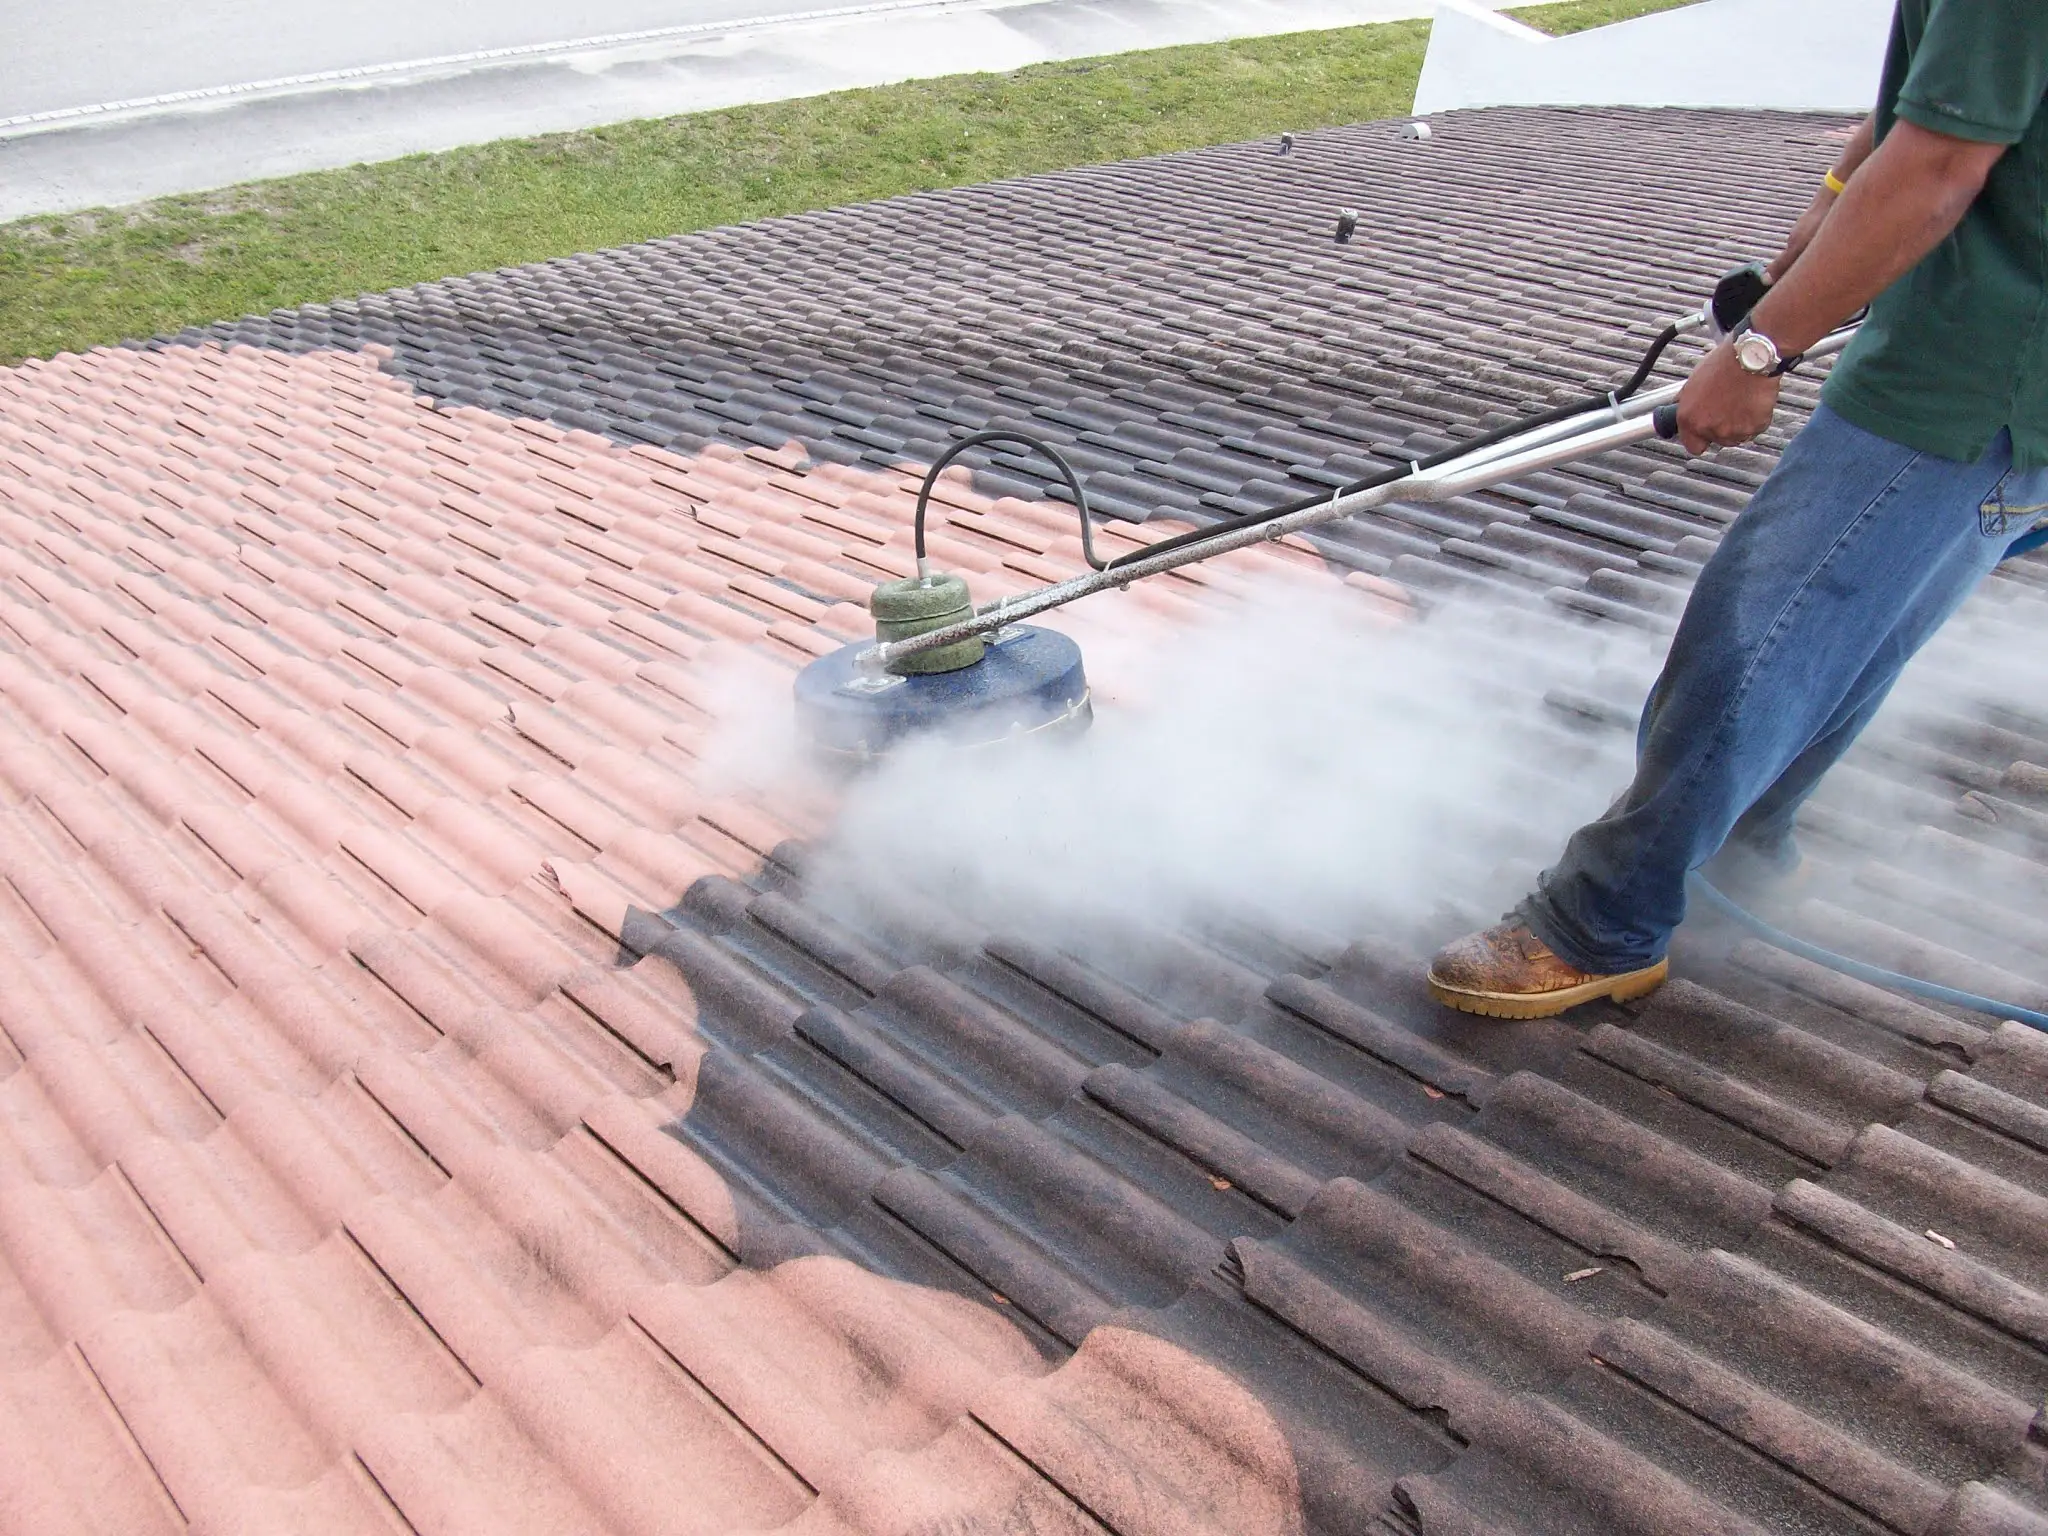 How much does it cost to clean roofs?